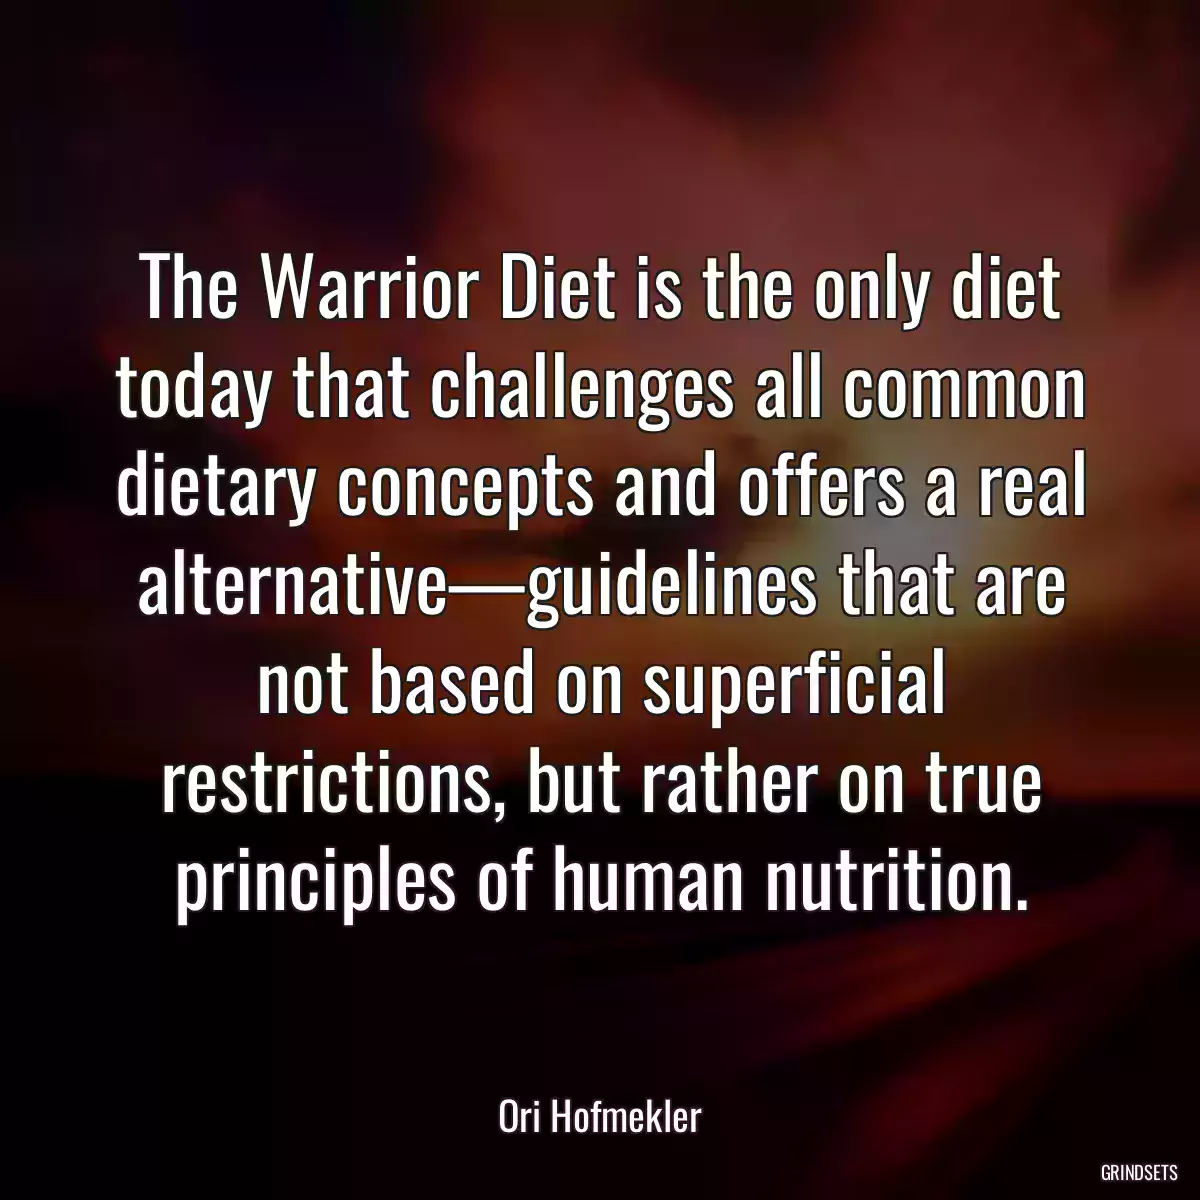 The Warrior Diet is the only diet today that challenges all common dietary concepts and offers a real alternative—guidelines that are not based on superficial restrictions, but rather on true principles of human nutrition.